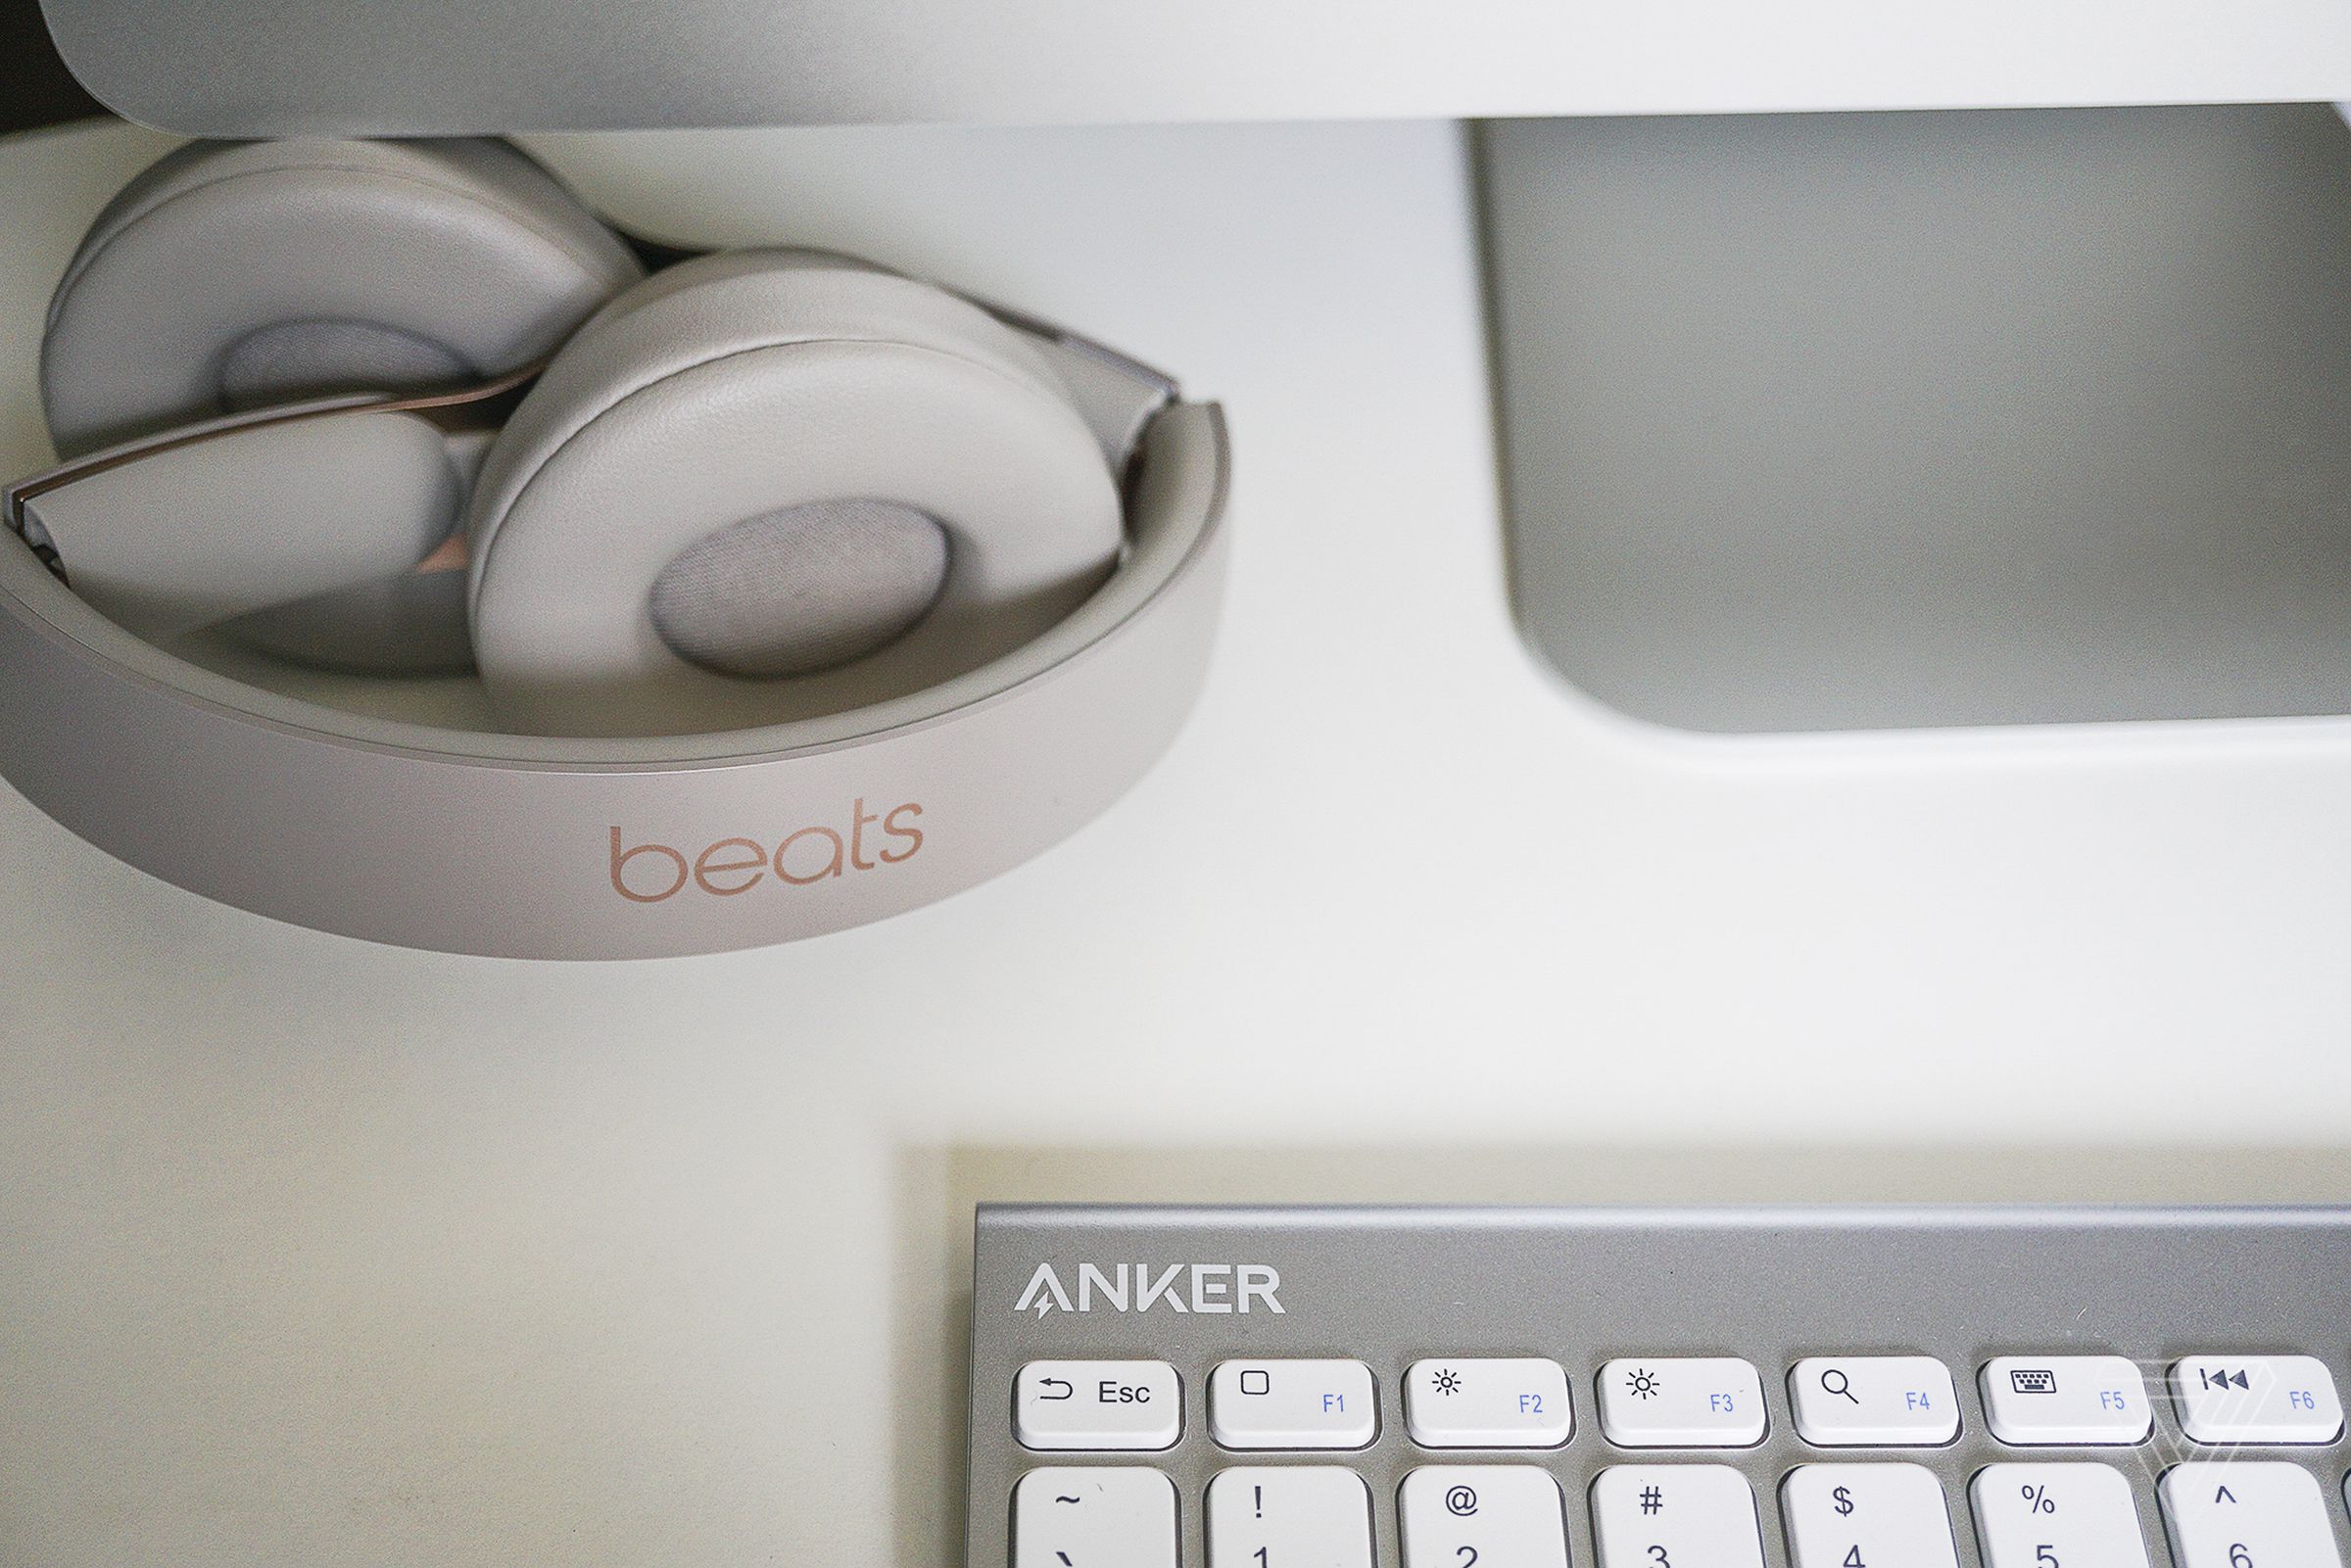 Beats Solo Pro and an Anker keyboard